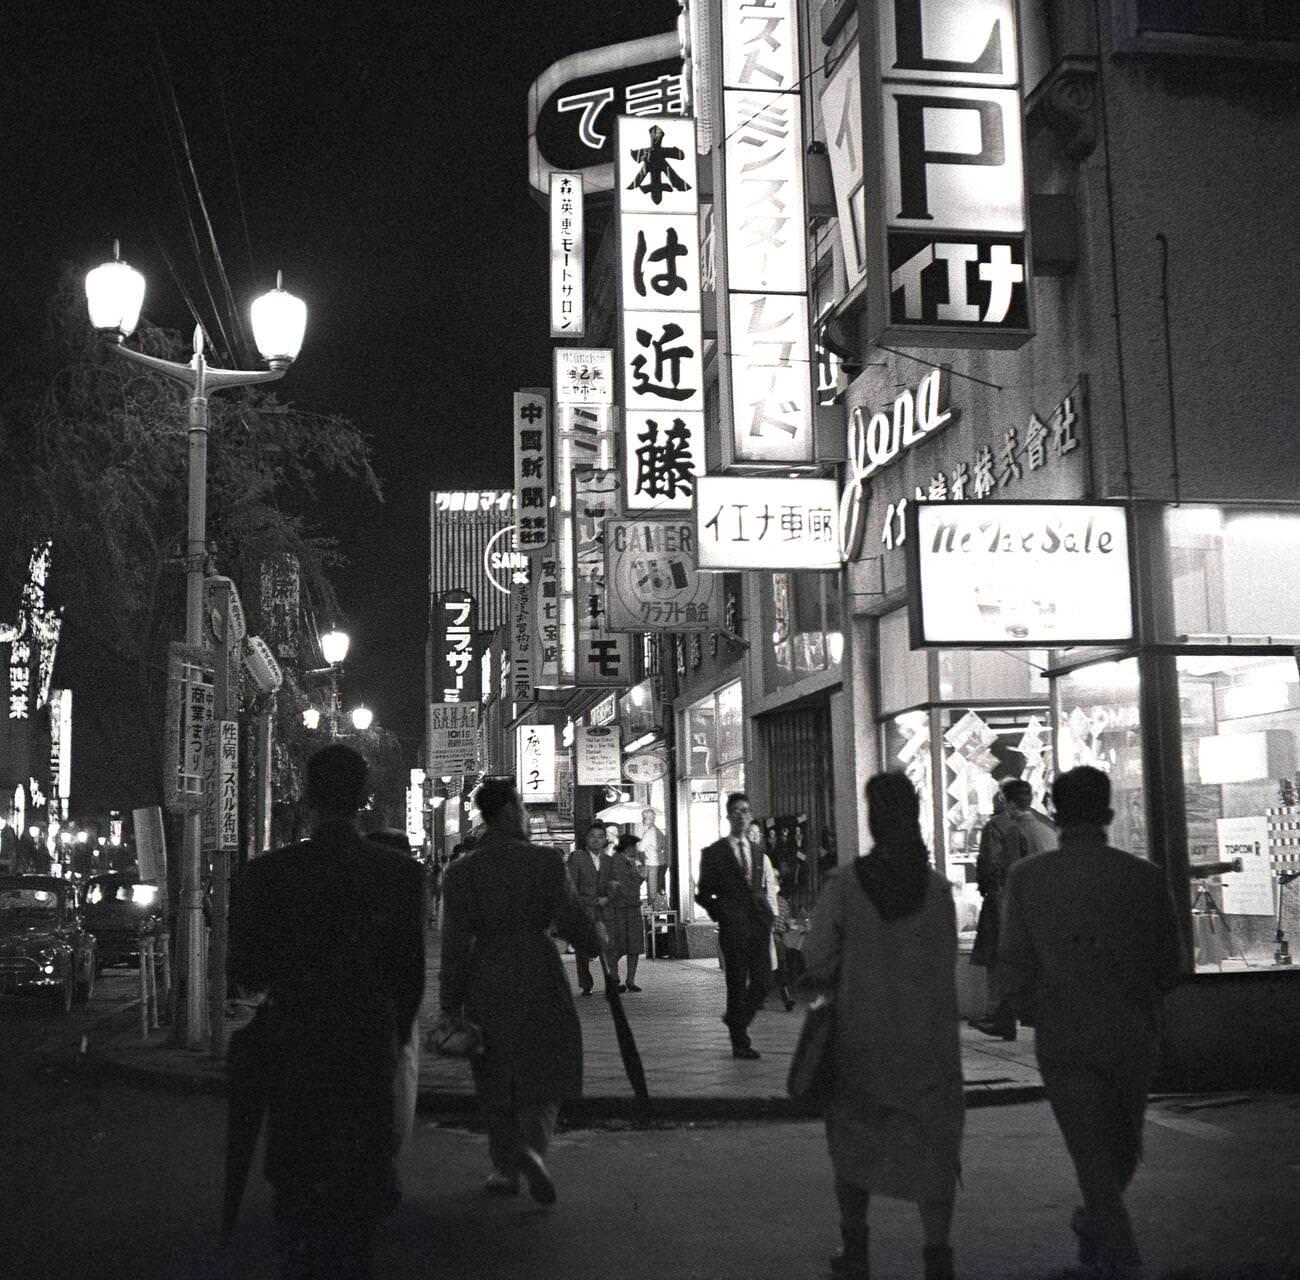 Shop lights and signs light up the city of Tokyo at evening time, 1950s.